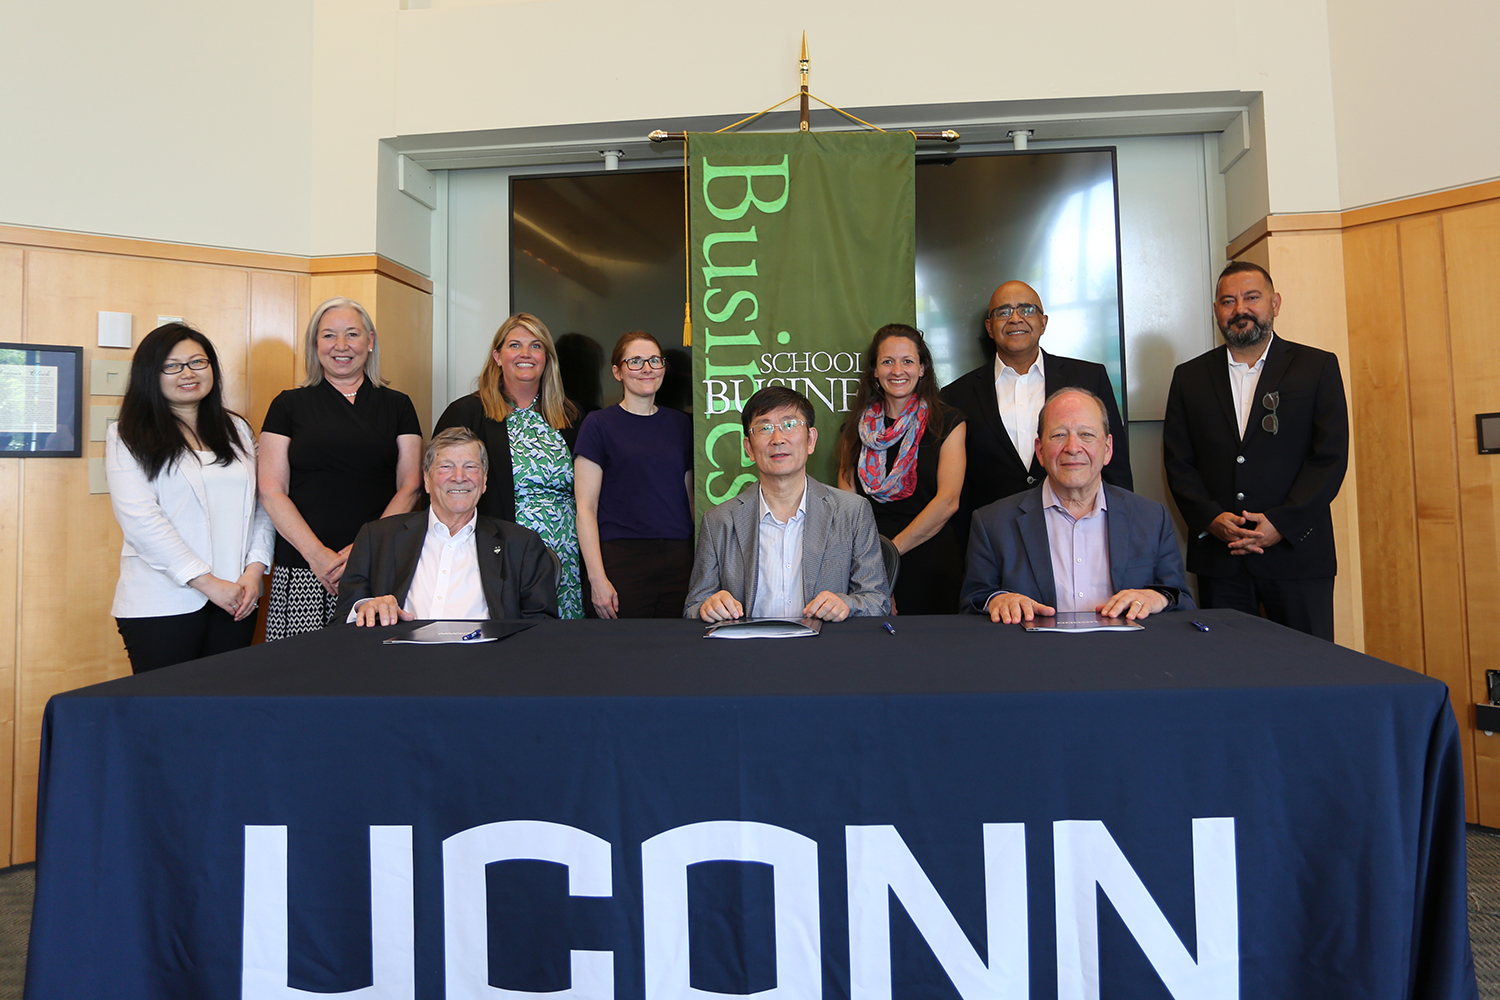 In front, L to R, John A. Elliott, Shenghao Han, and Kent Holsinger, sit for a picture surrounded by key staff that helped create the partnership.